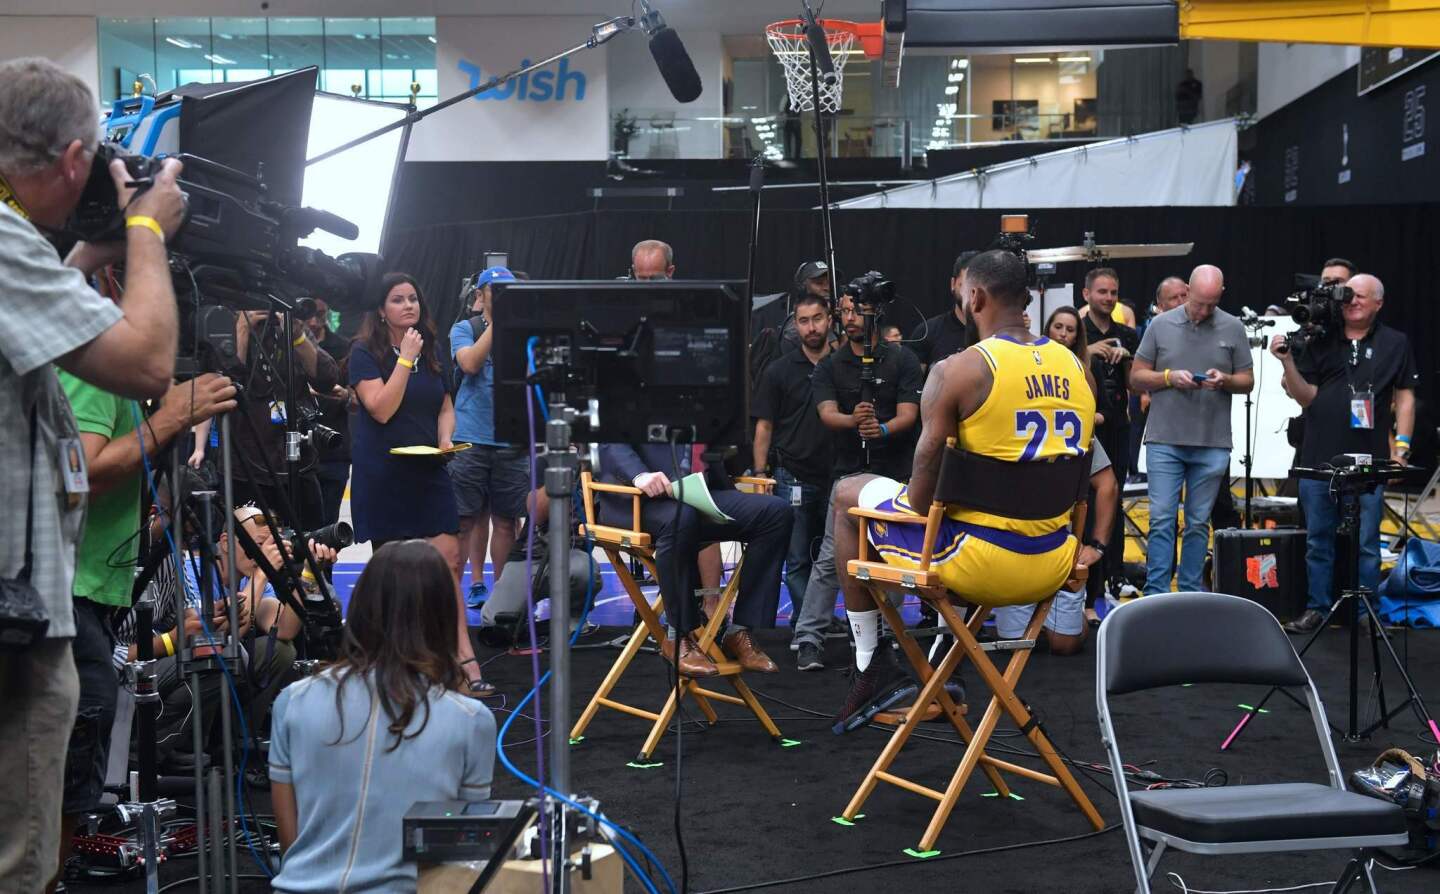 LeBron James is interviewed during the Los Angeles Lakers Media Day event in Los Angeles, California, September 24, 2018. - The Lakers open their 2018 NBA season in Portland on October 18th. (Photo by Frederic J. BROWN / AFP)FREDERIC J. BROWN/AFP/Getty Images ** OUTS - ELSENT, FPG, CM - OUTS * NM, PH, VA if sourced by CT, LA or MoD **